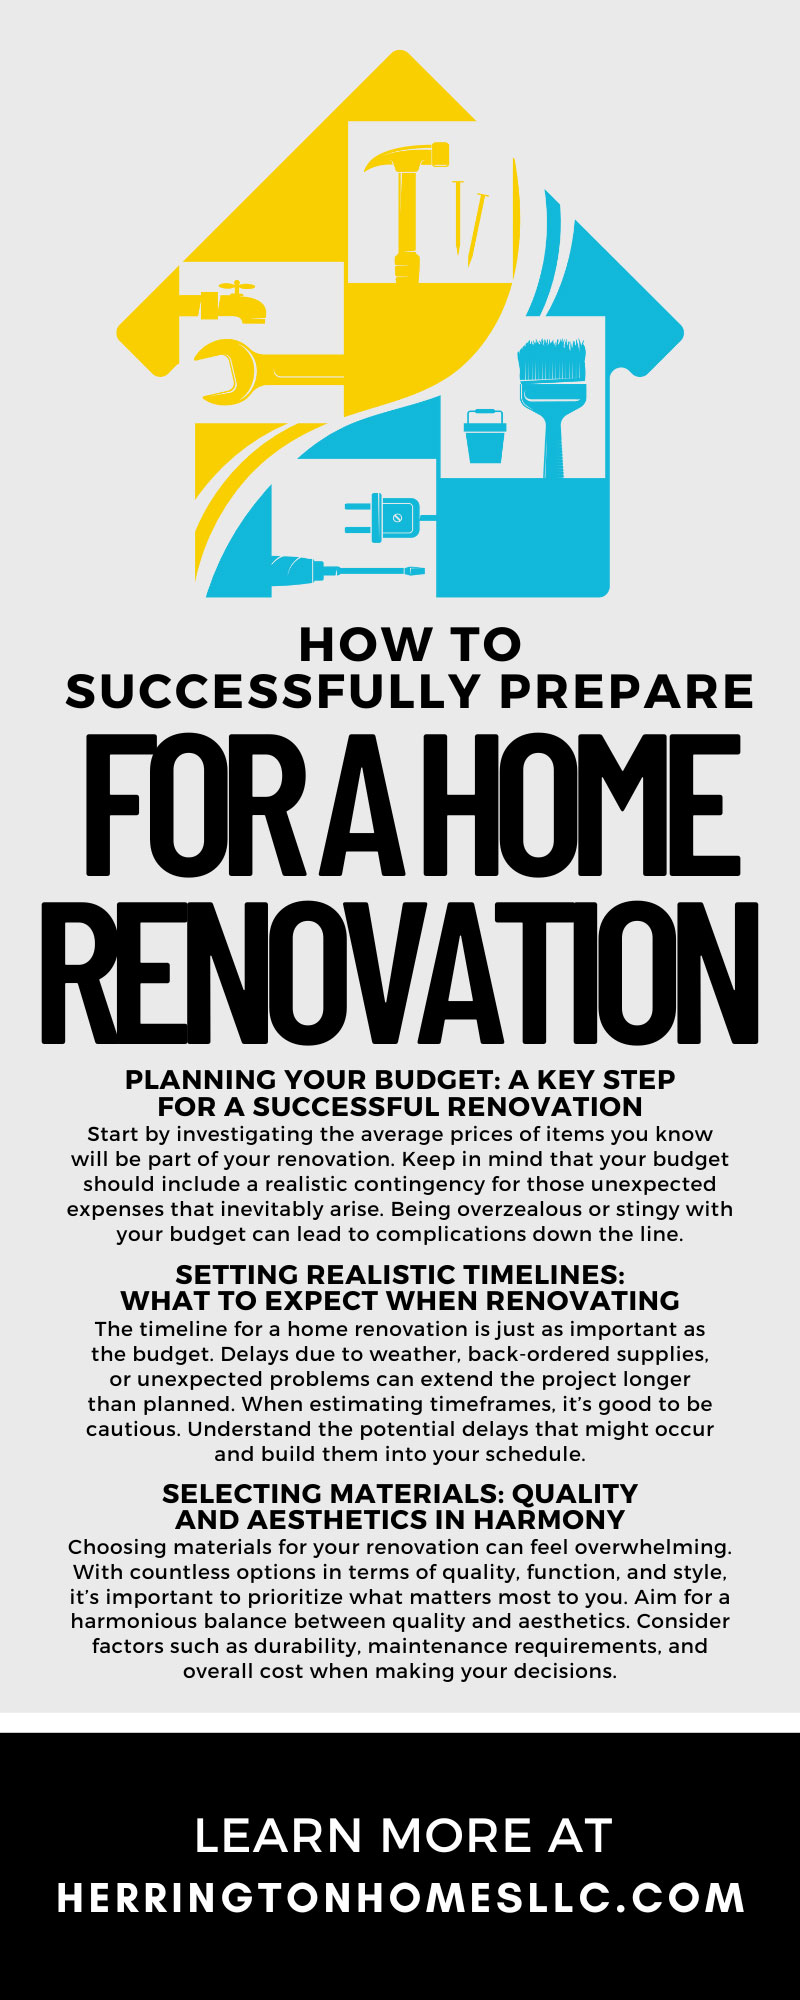 How To Successfully Prepare for a Home Renovation
